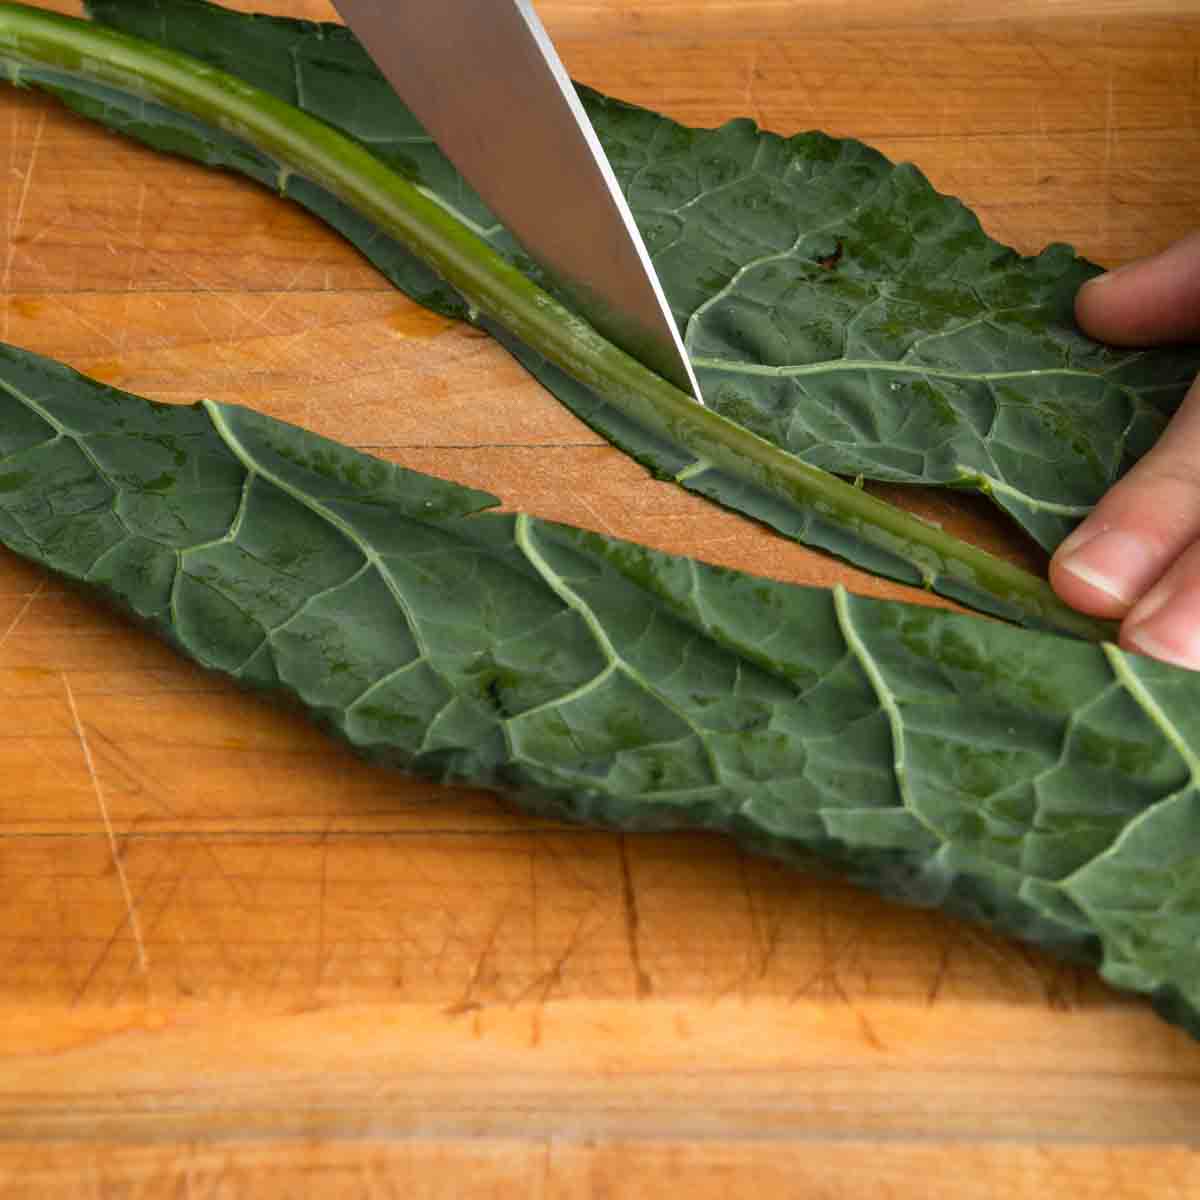 Using the tip of a knife to cut the rib out of a leaf of kale.